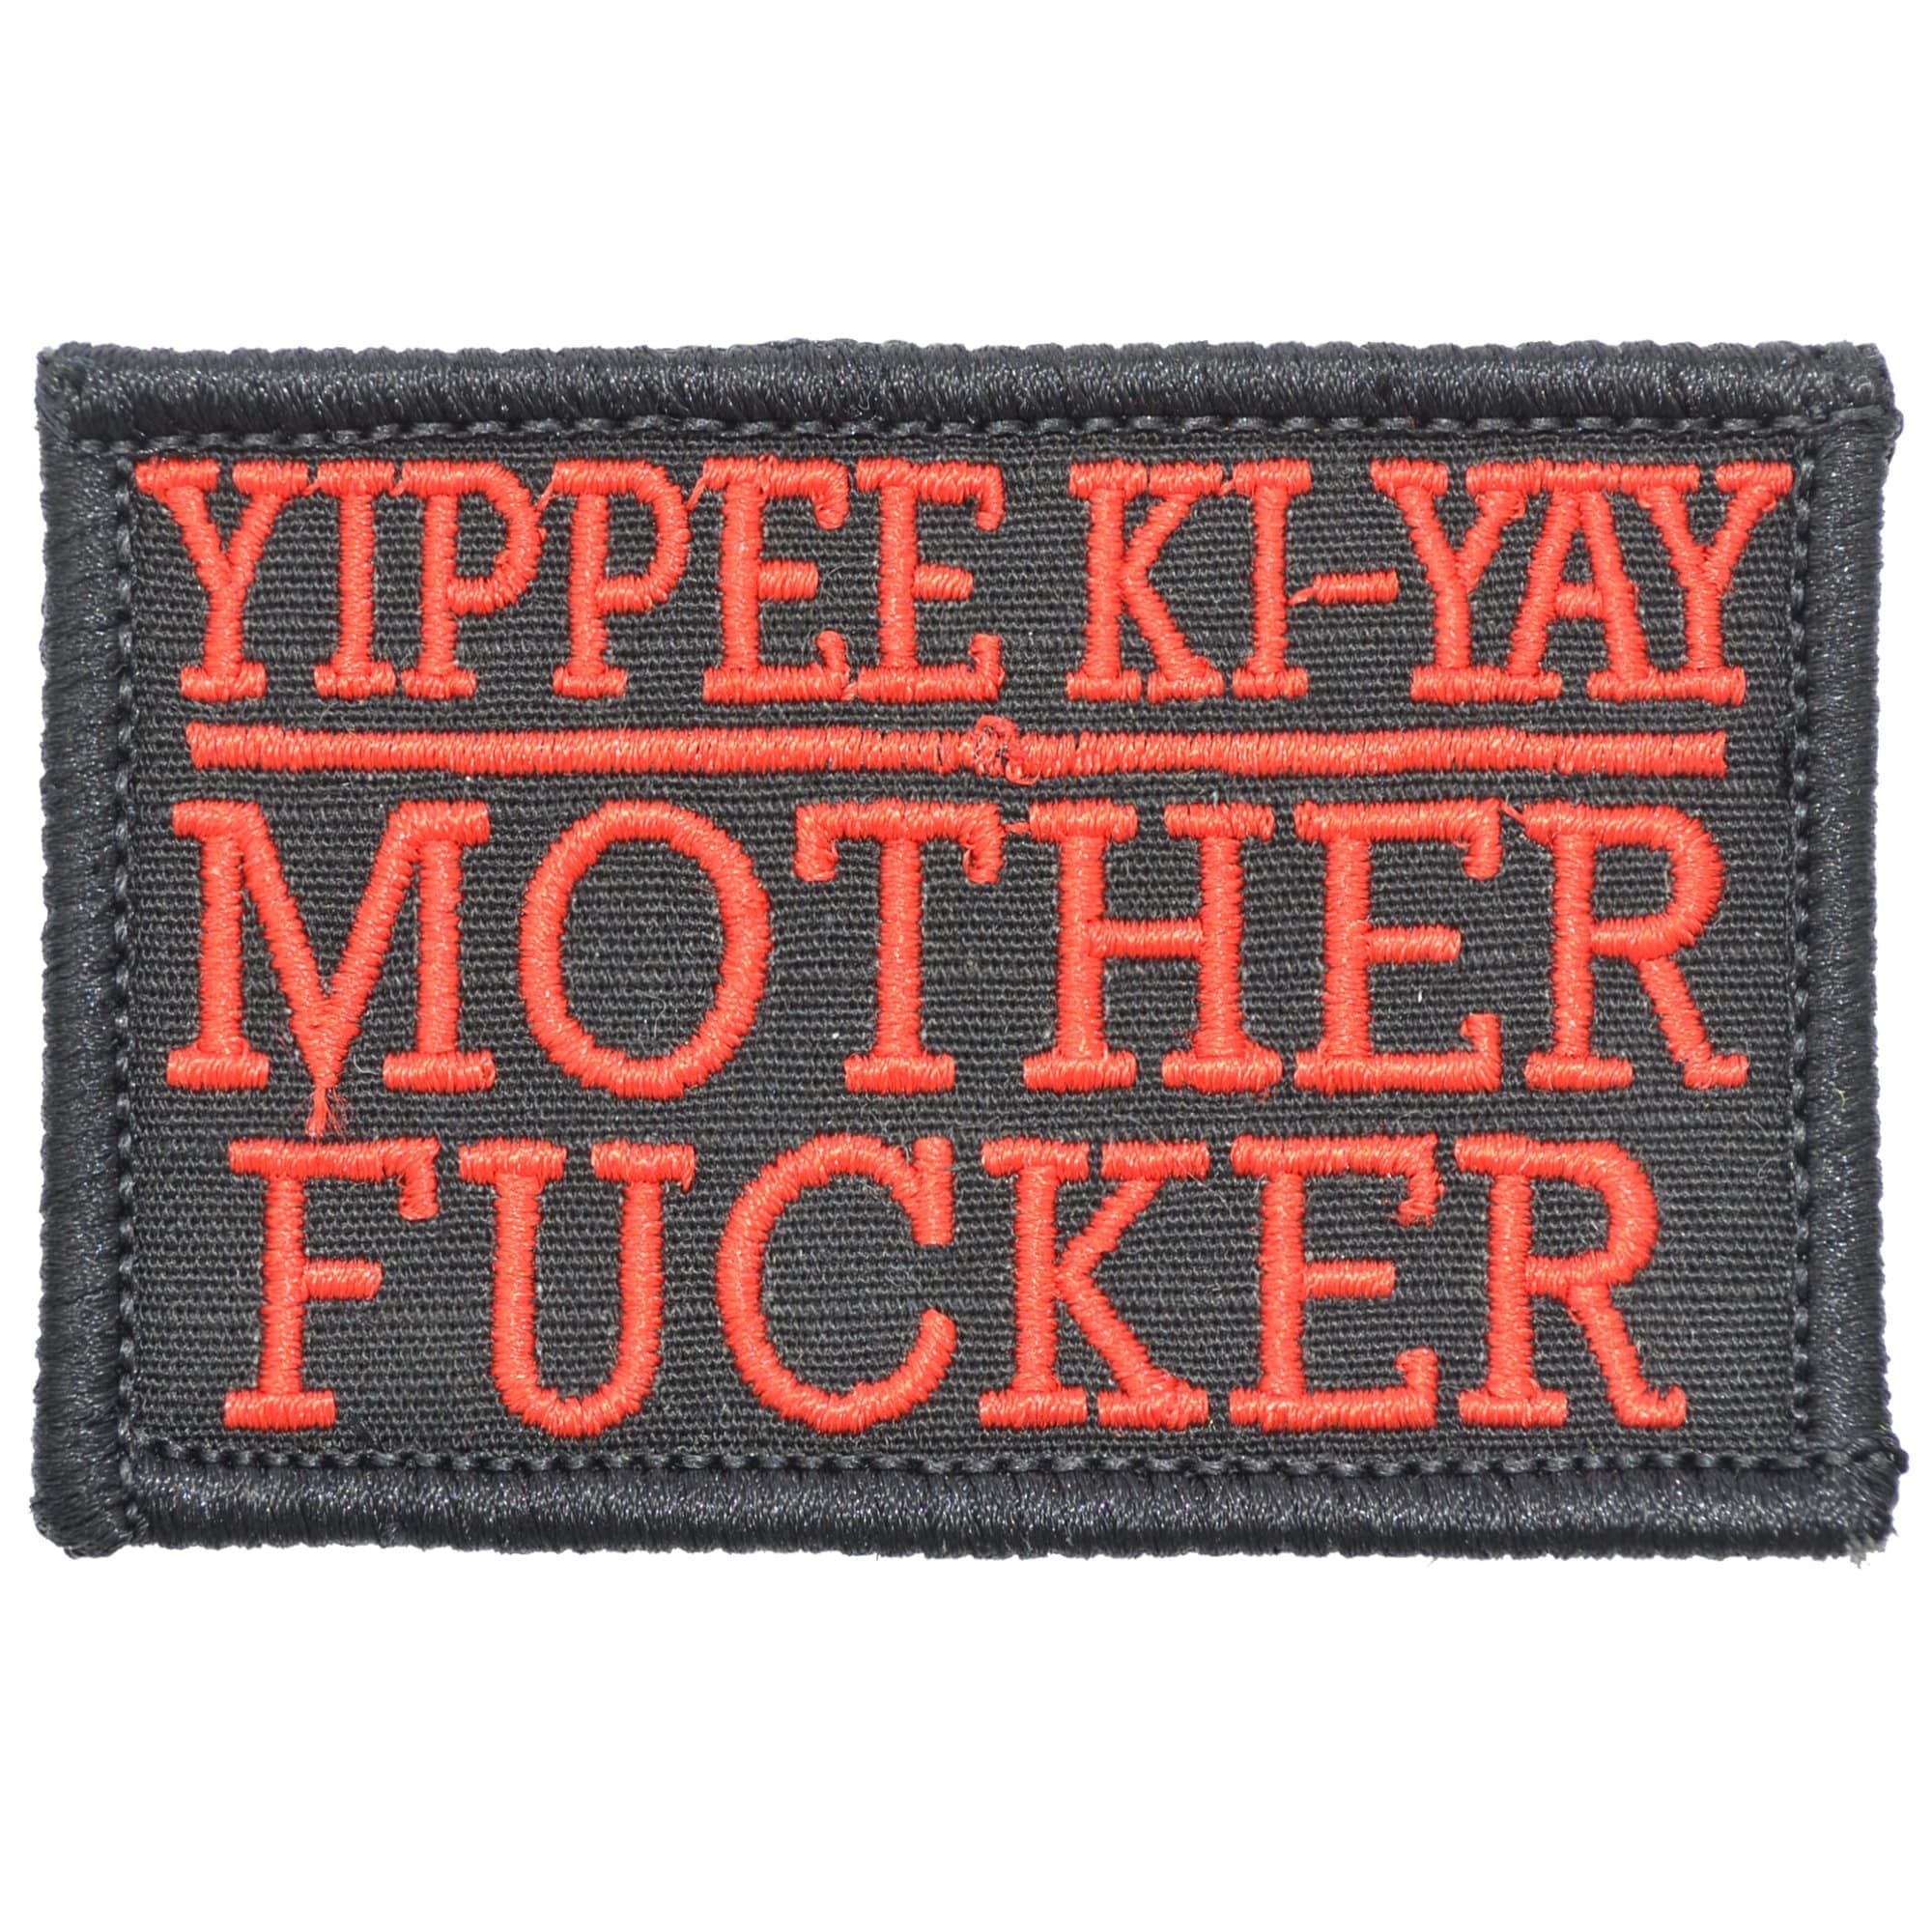 Tactical Gear Junkie Patches Black w/ Red Yippee Ki-Yay Mother Fucker - 2x3 Patch